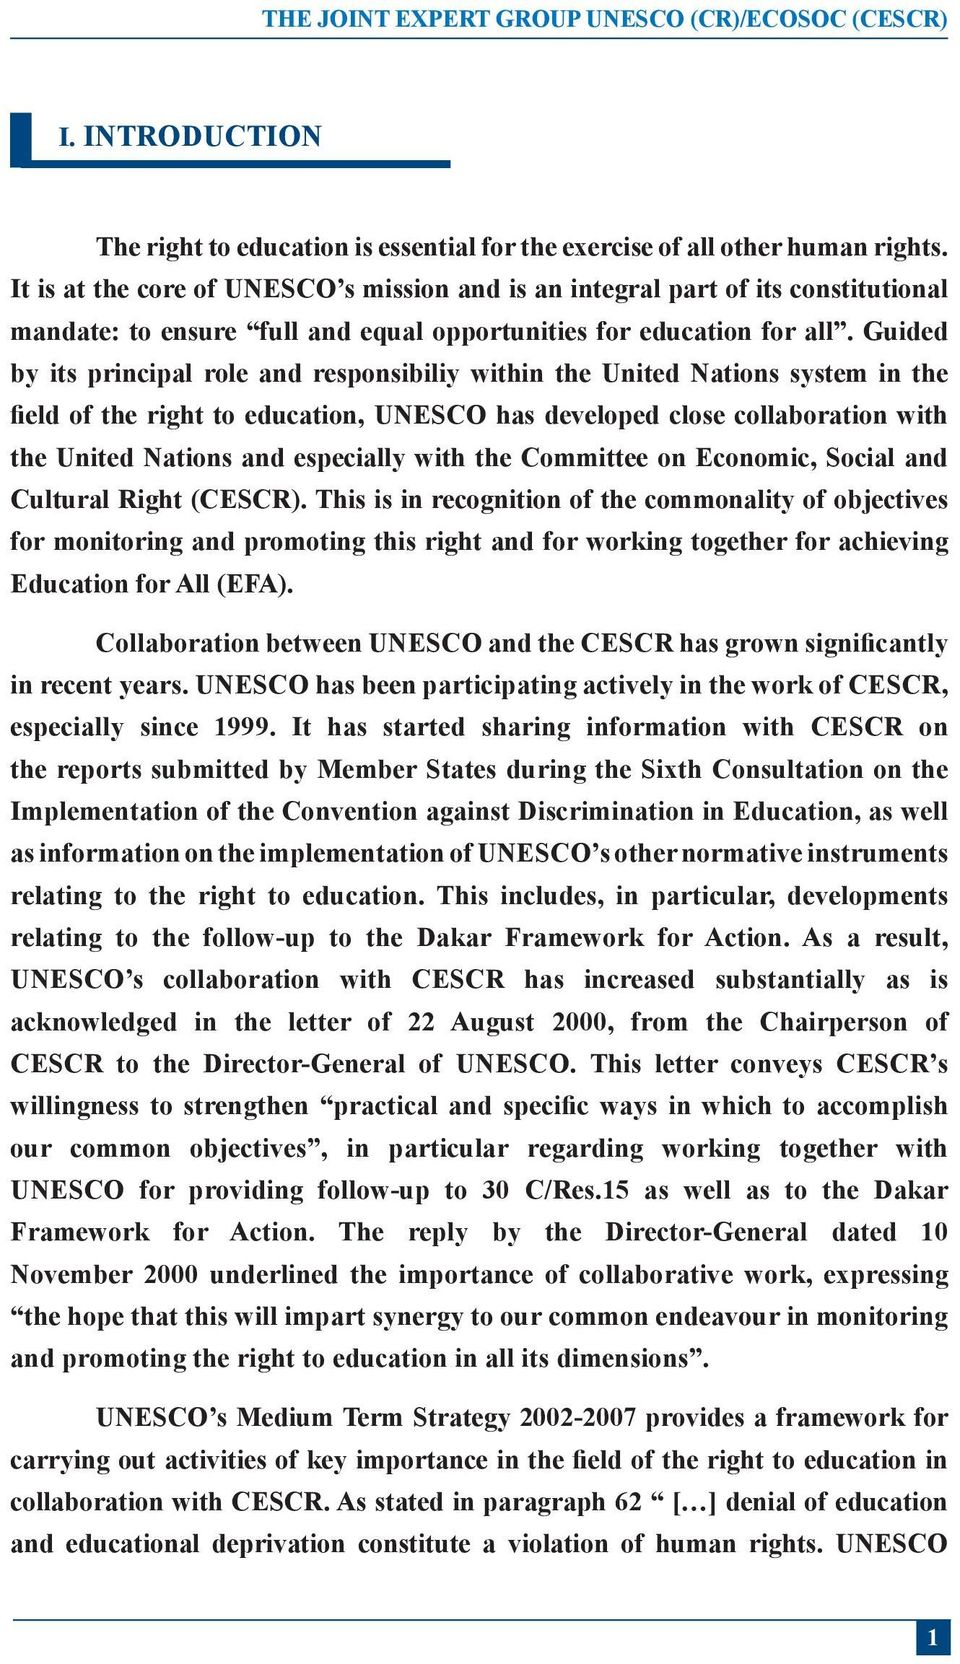 Guided by its principal role and responsibiliy within the United Nations system in the field of the right to education, UNESCO has developed close collaboration with the United Nations and especially